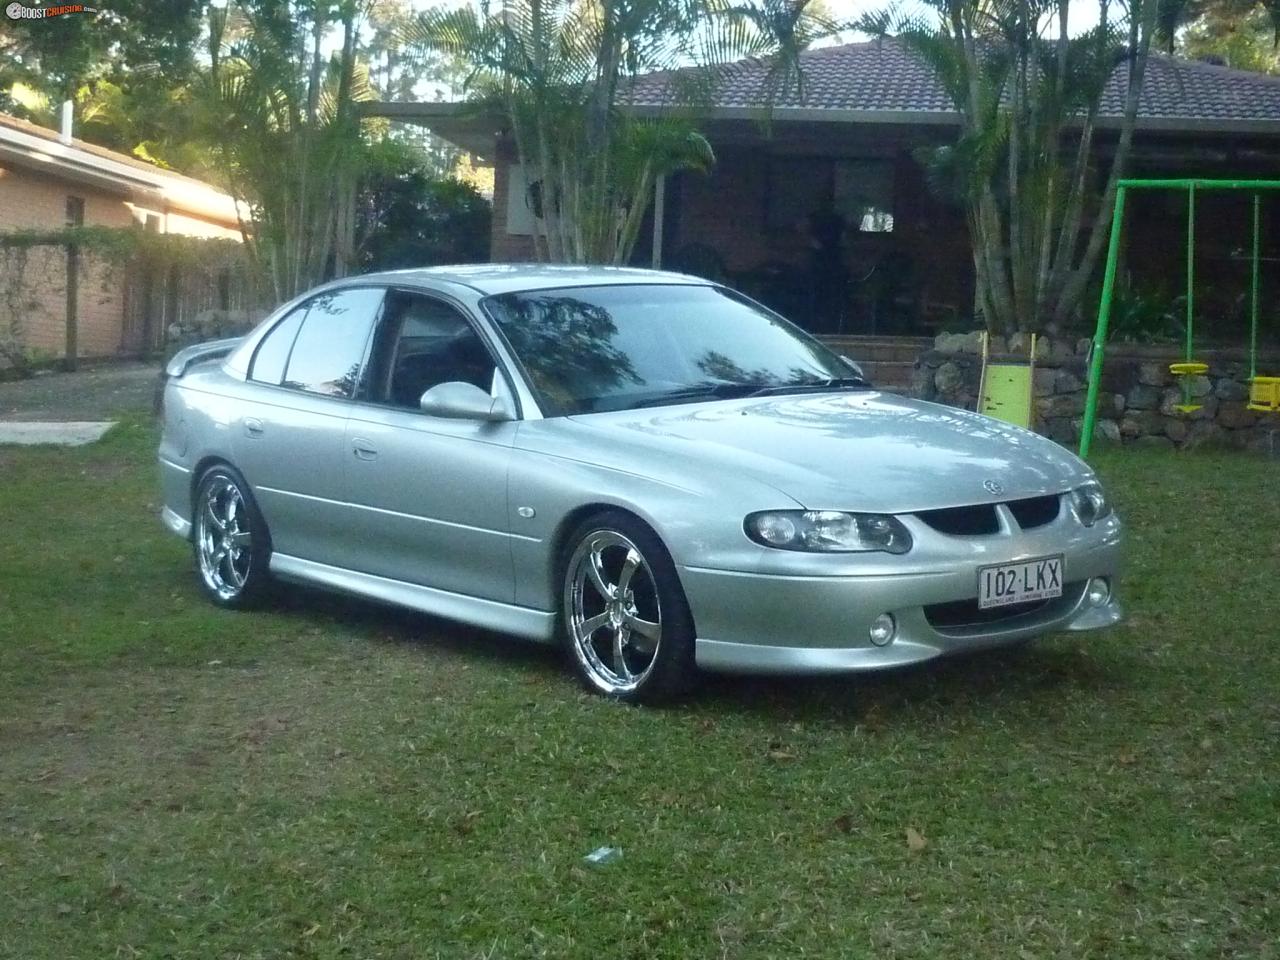 2001 Holden Commodore Vx Ss 11